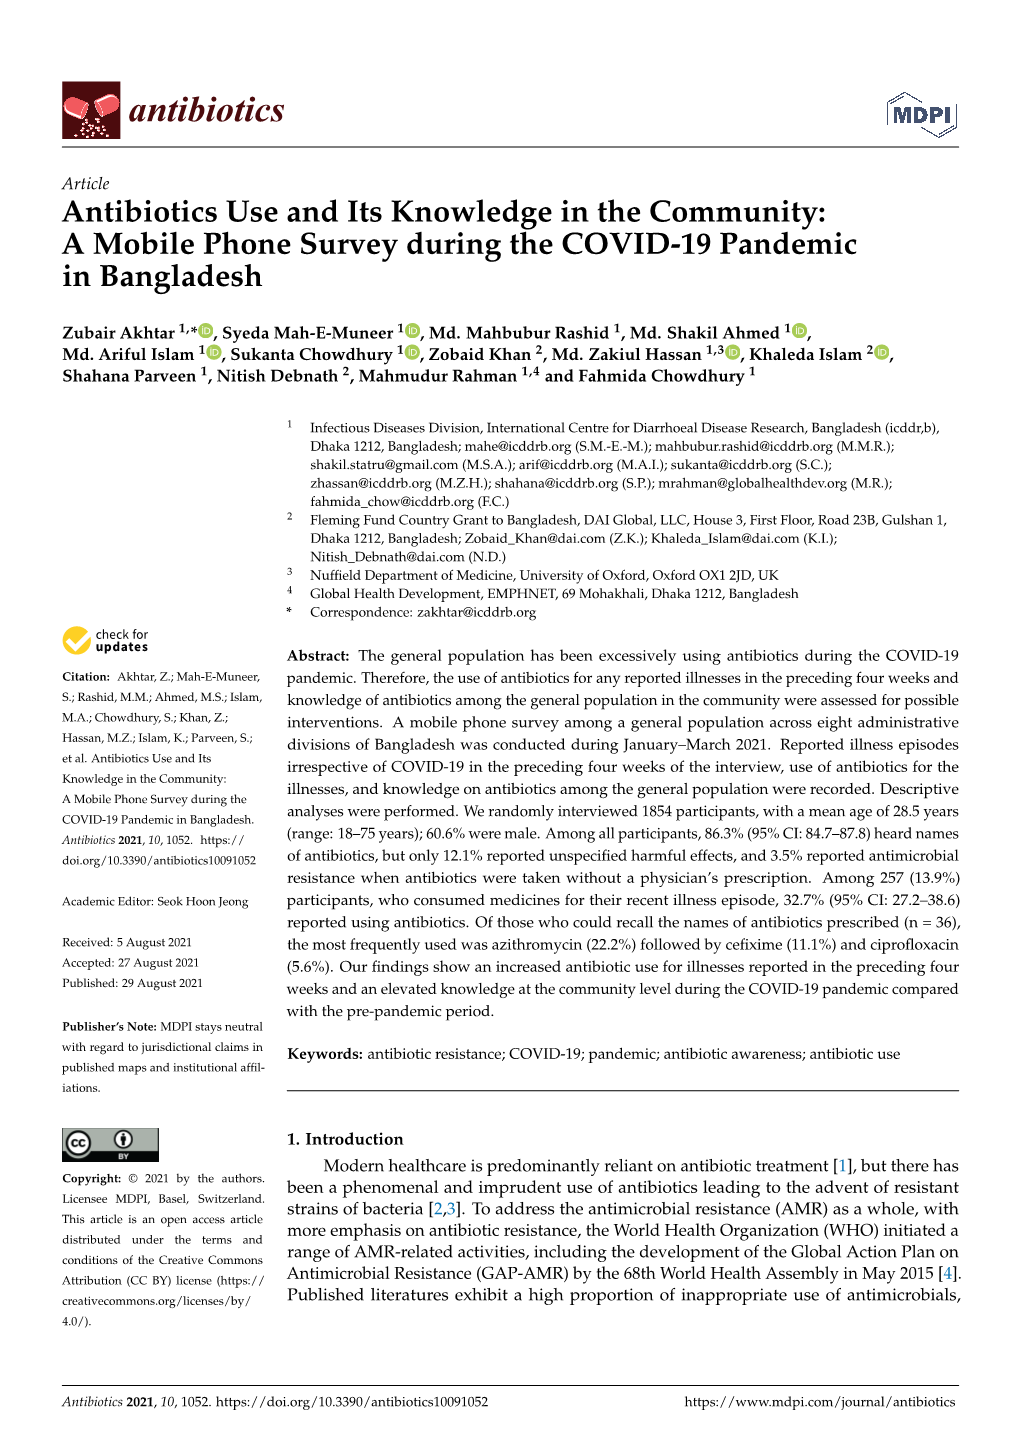 Antibiotics Use and Its Knowledge in the Community: a Mobile Phone Survey During the COVID-19 Pandemic in Bangladesh